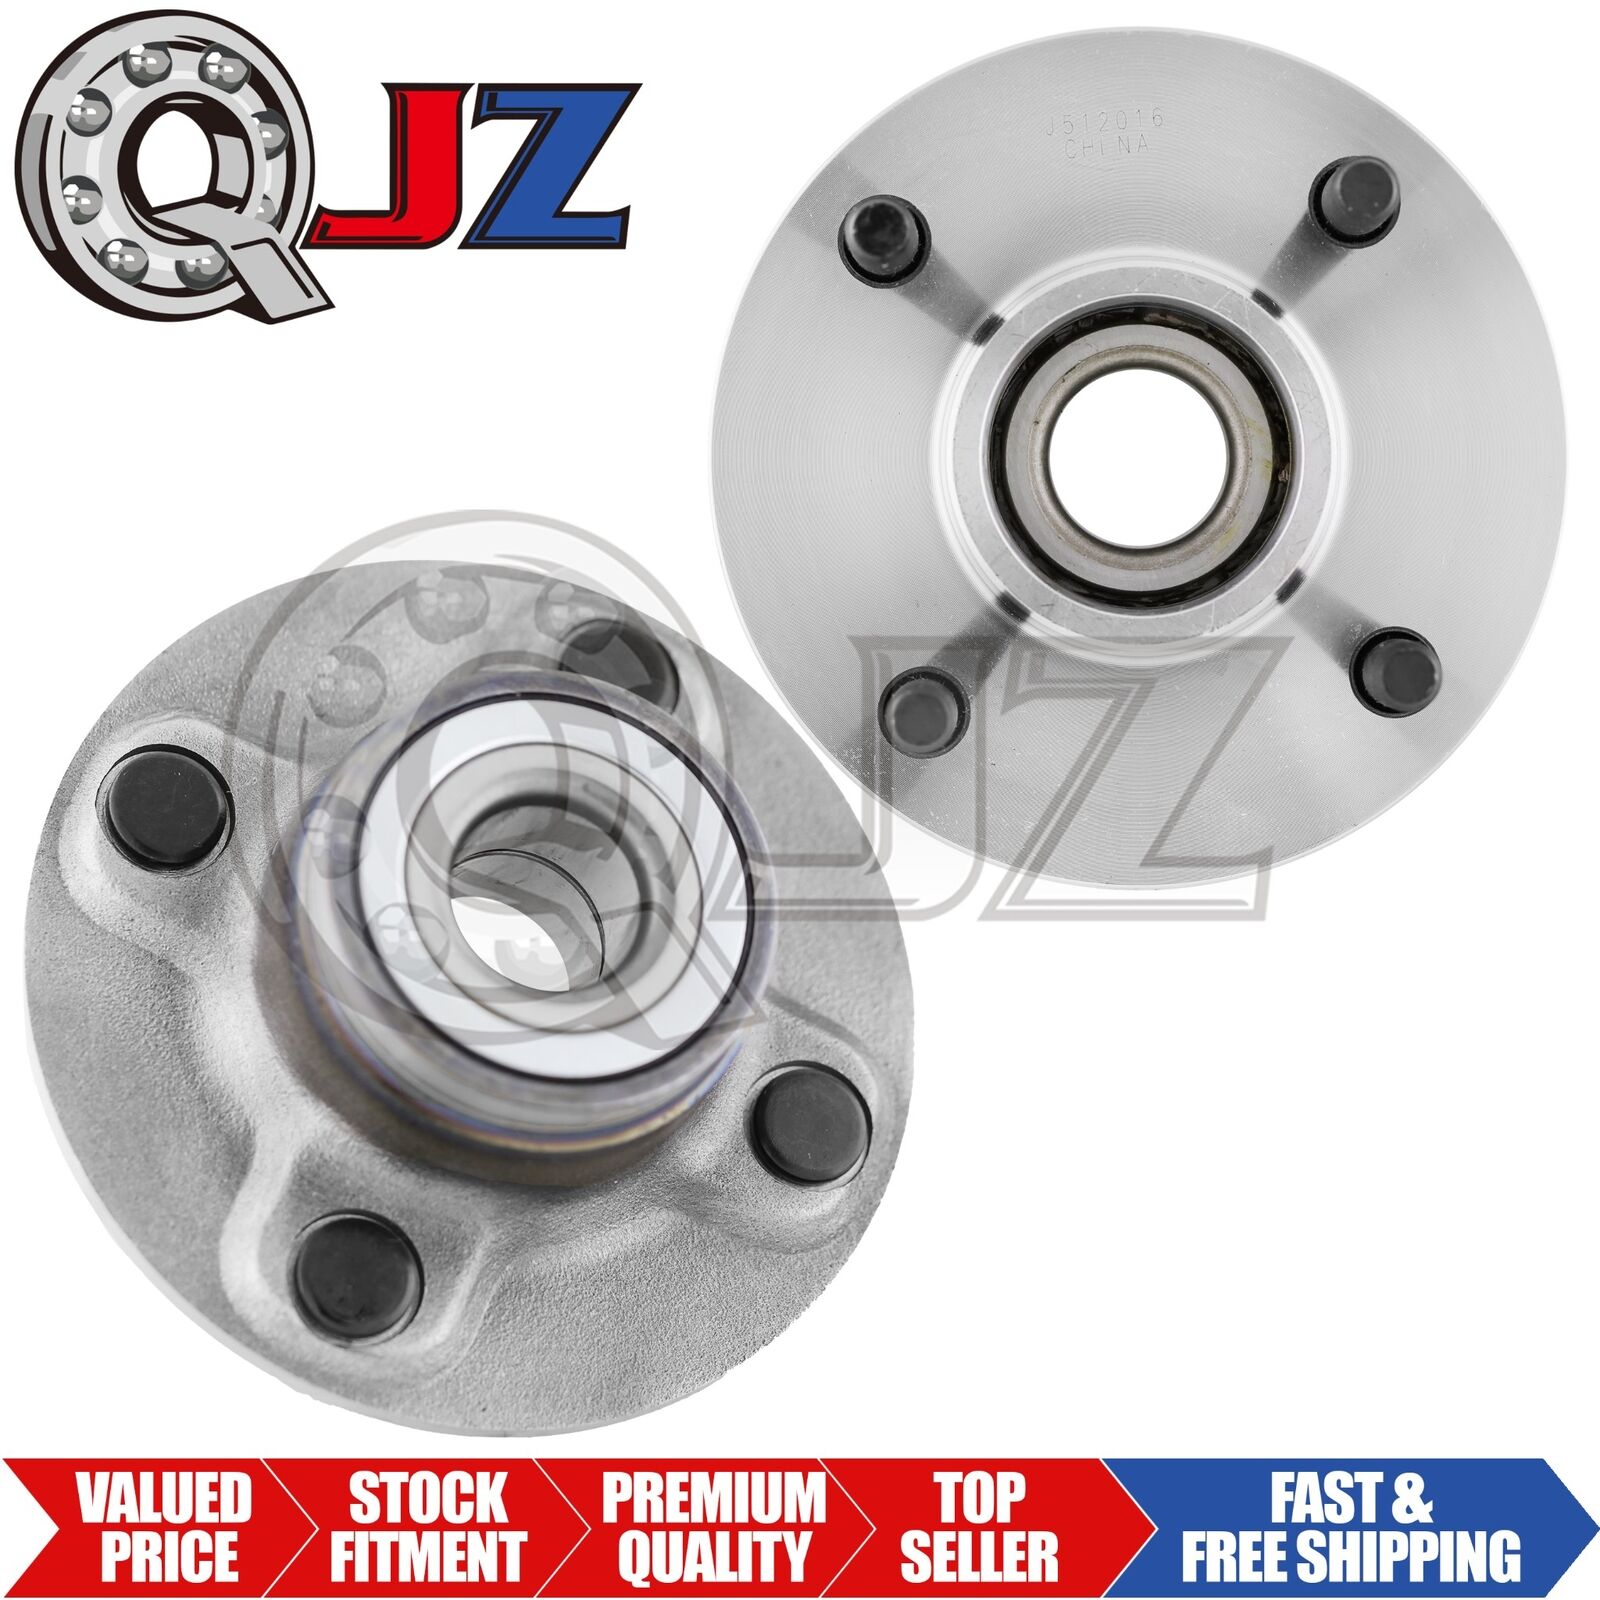 [2-Pack] 512016 REAR Wheel Hub Assembly For 1990-1992 Nissan Stanza Non-ABS FWD